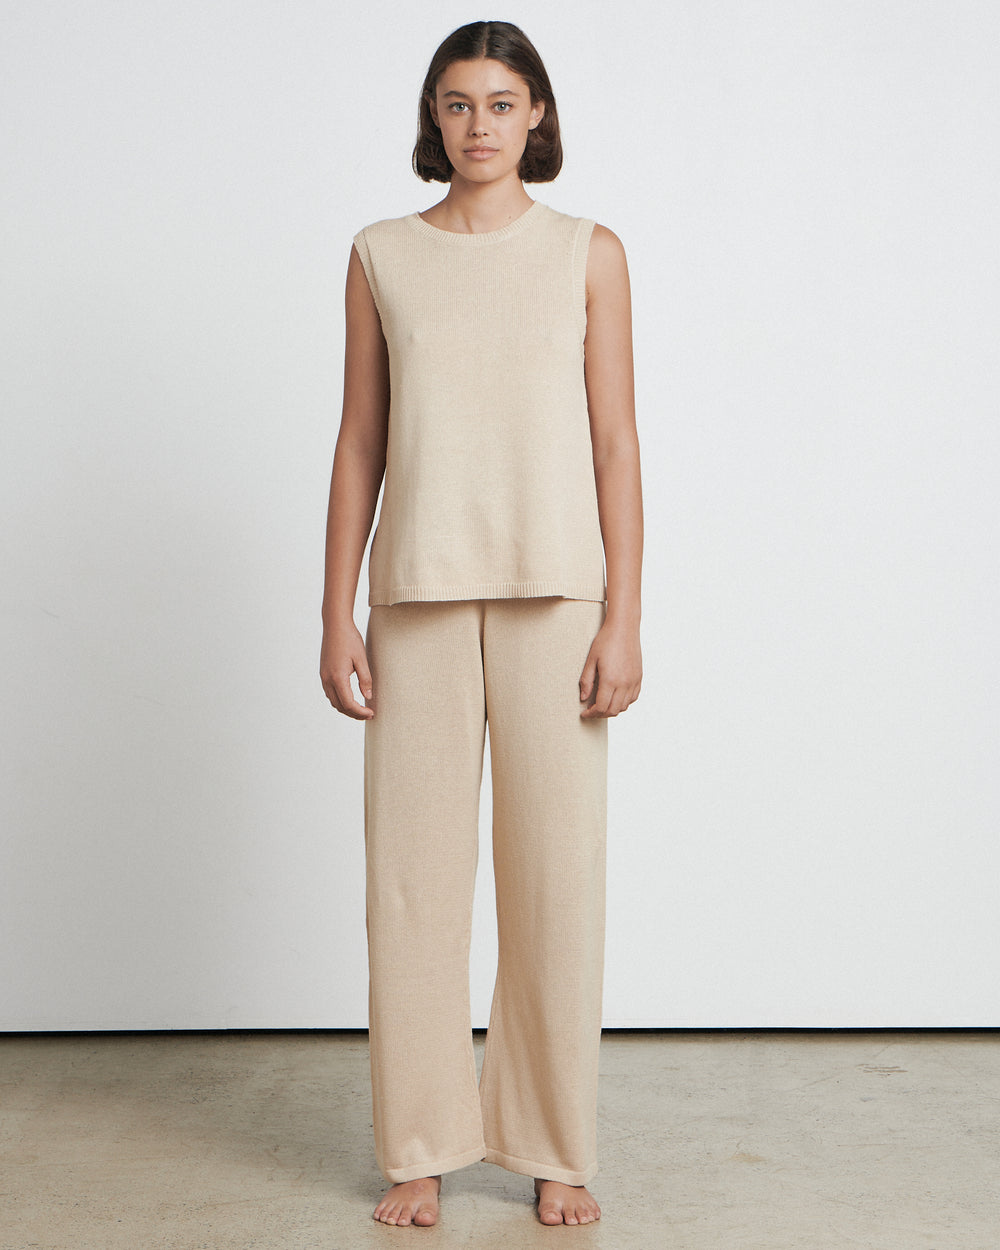 The Knitted Lounge Pant